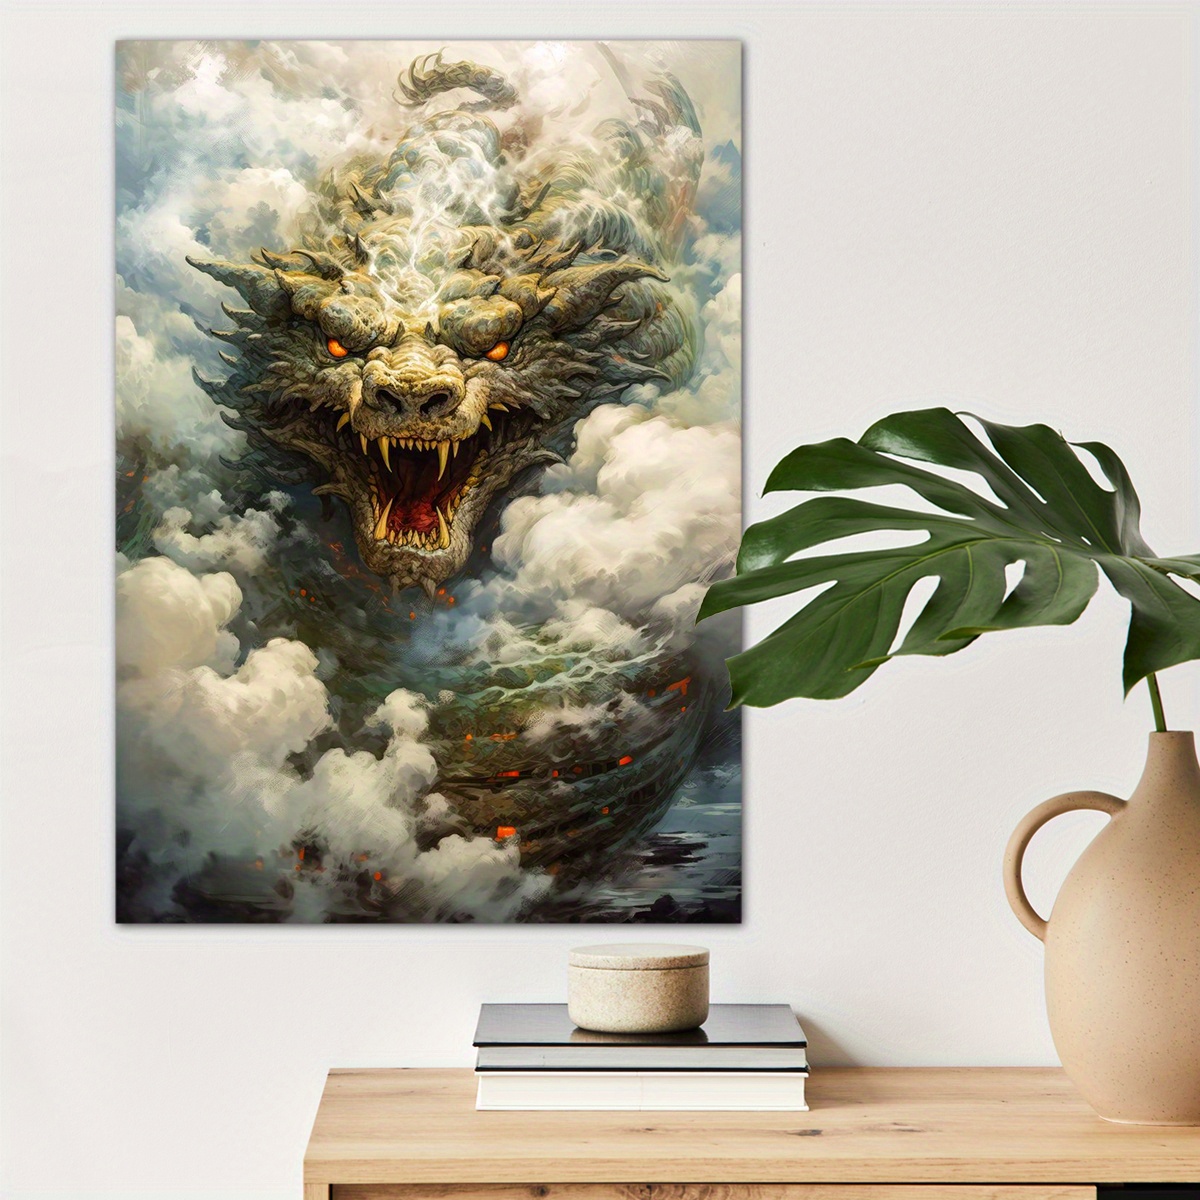 

1pc Dragon In Clouds Canvas Wall Art For Home Decor, Sky Poster Wall Decor High Quality Canvas Prints For Living Room Bedroom Kitchen Office Cafe Decor, Perfect Gift And Decoration